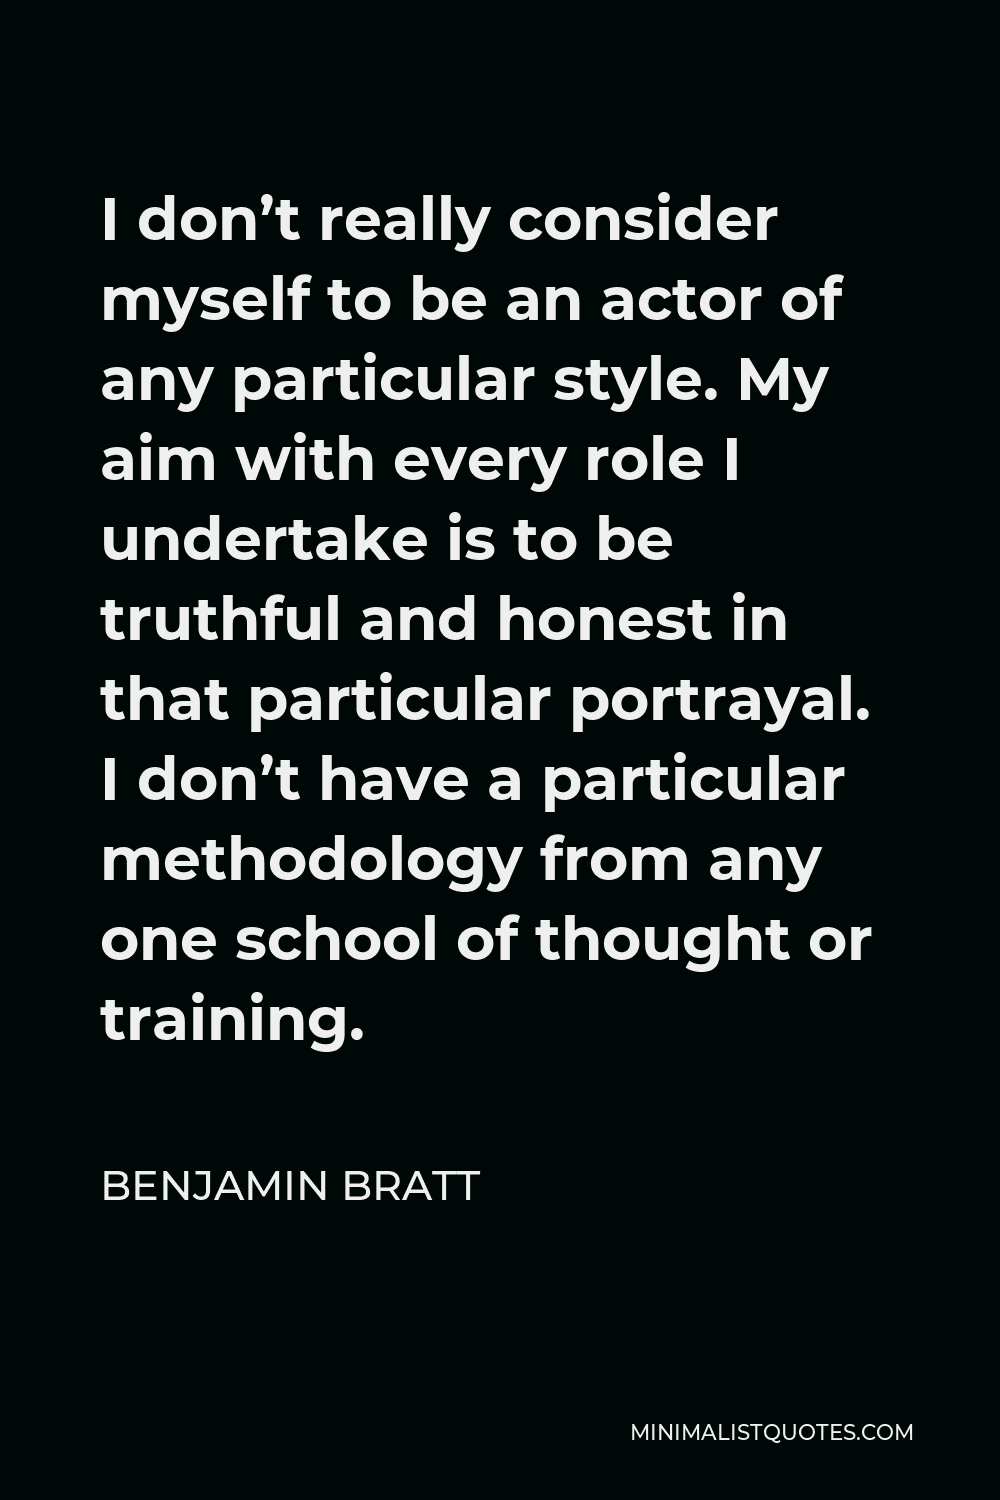 Benjamin Bratt Quote - I don’t really consider myself to be an actor of any particular style. My aim with every role I undertake is to be truthful and honest in that particular portrayal. I don’t have a particular methodology from any one school of thought or training.